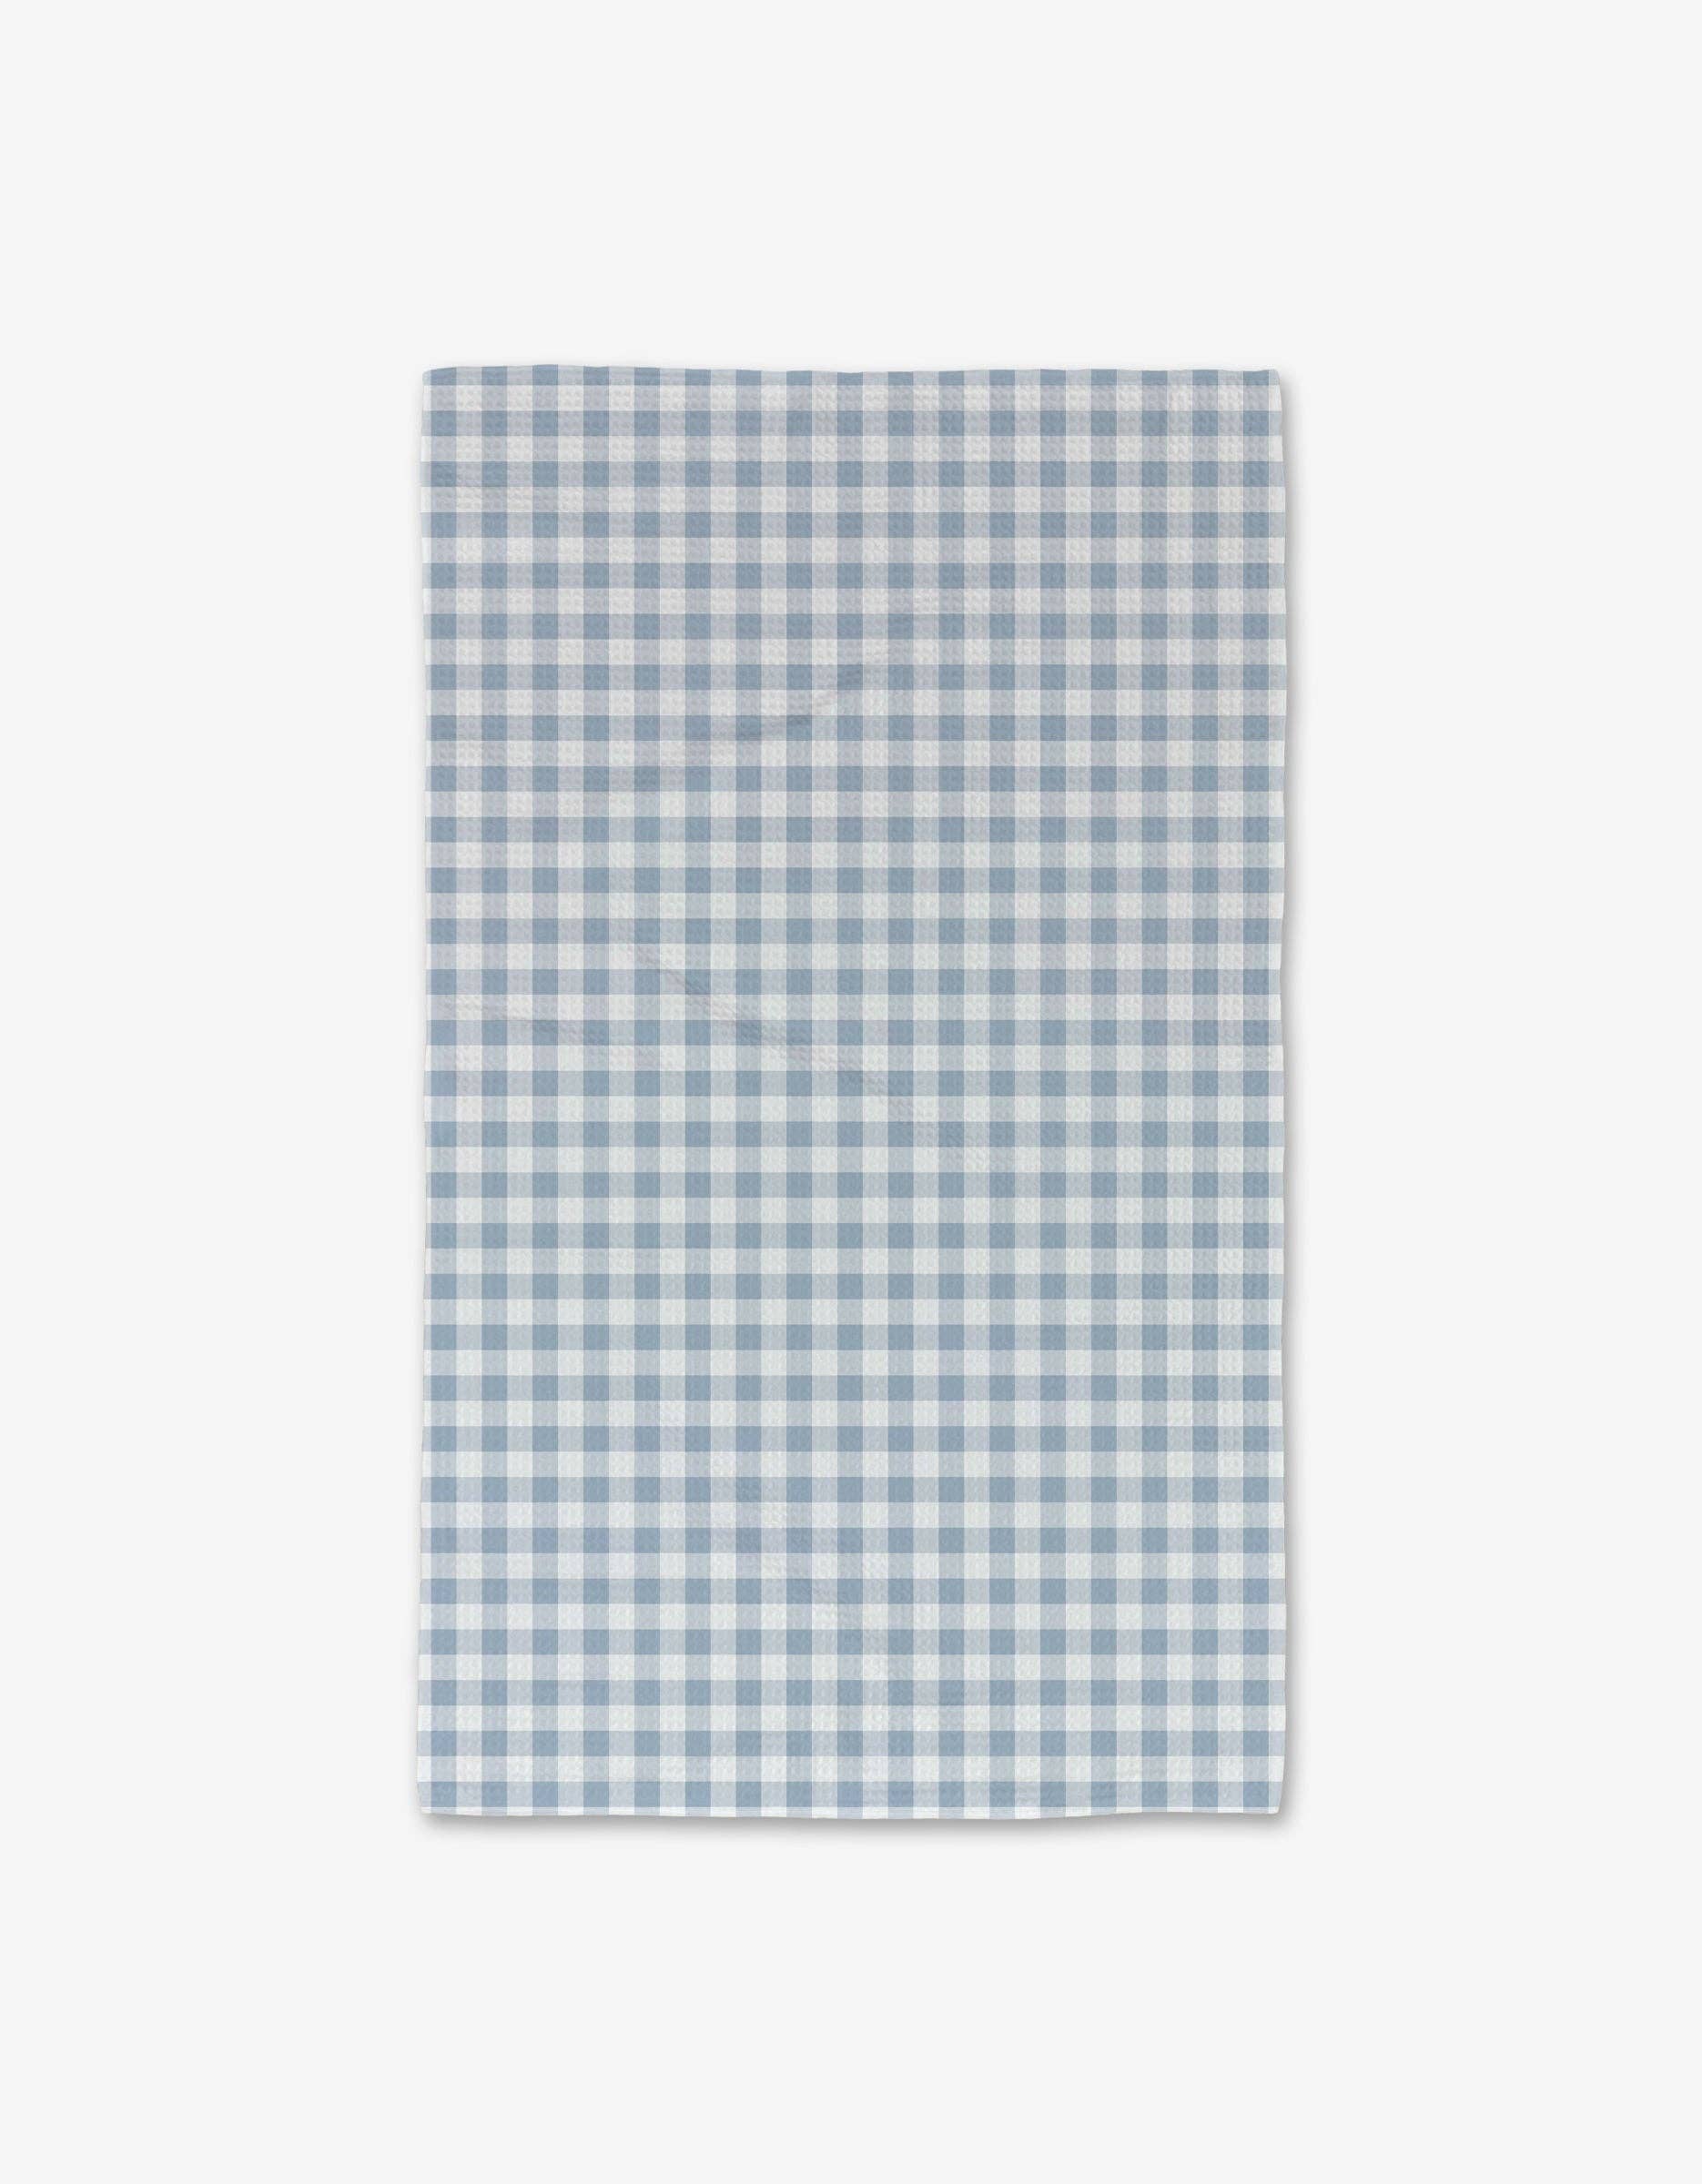 Blue Gingham Luxe Hand Towel by Geometry. Hand Towel has a blue and white gingham pattern background.